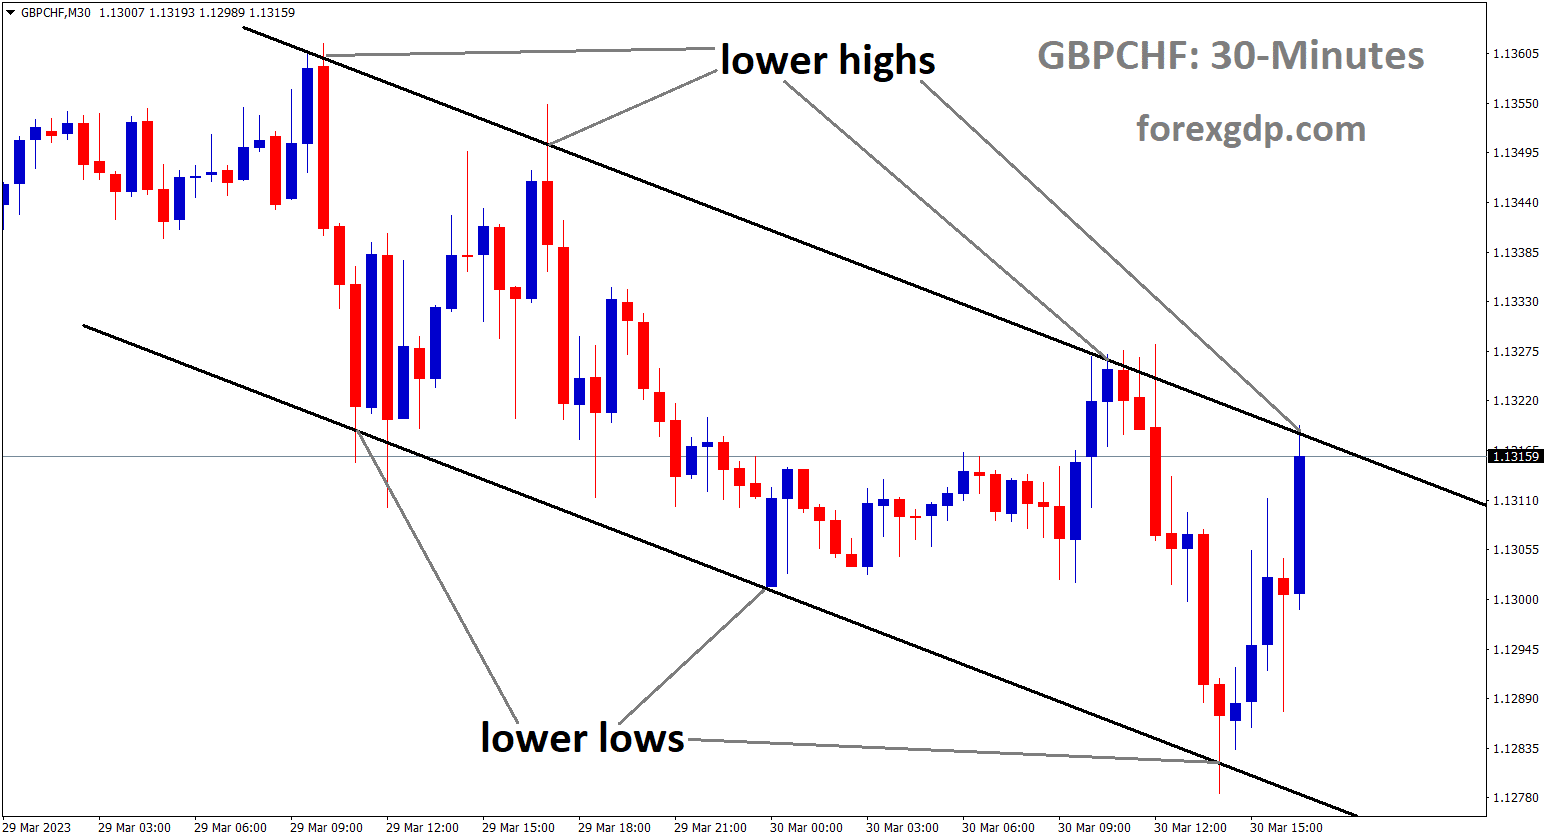 GBPCHF is moving in Descending channel and the market has reached the lower high area of the channel. 1